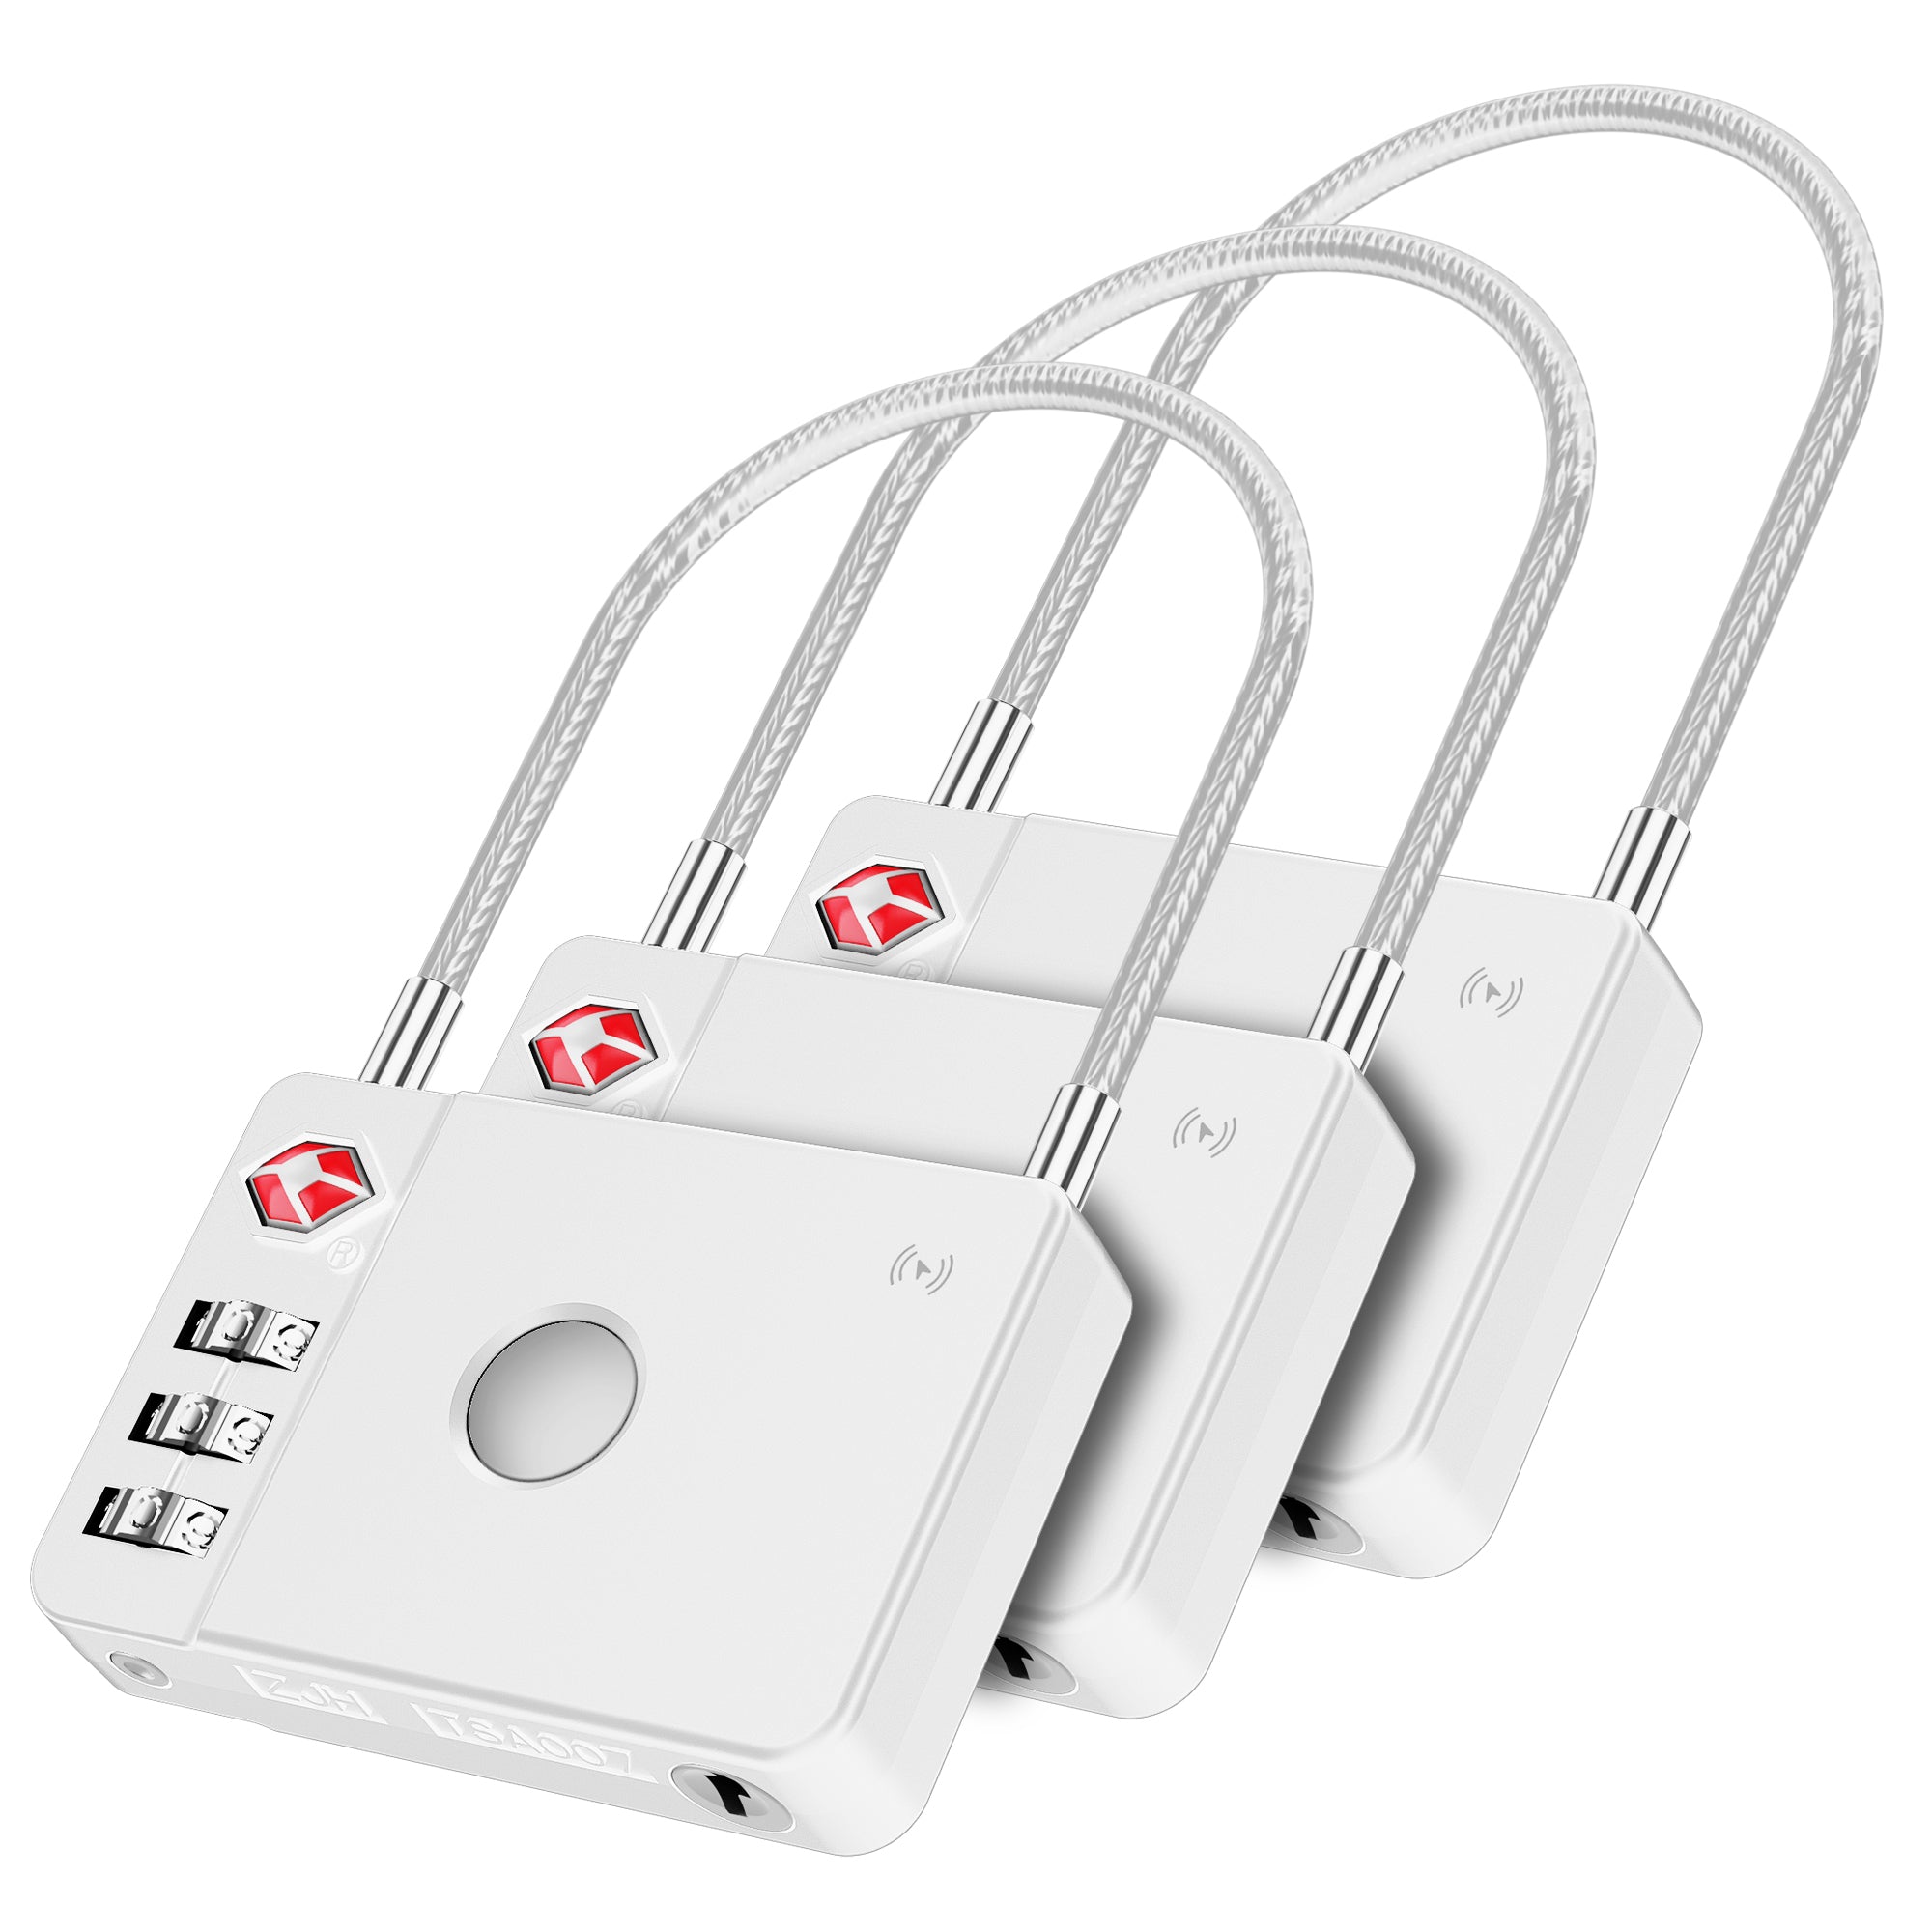 MiLock - World First TSA Approved Luggage Tracker Works with Apple Find My - White -